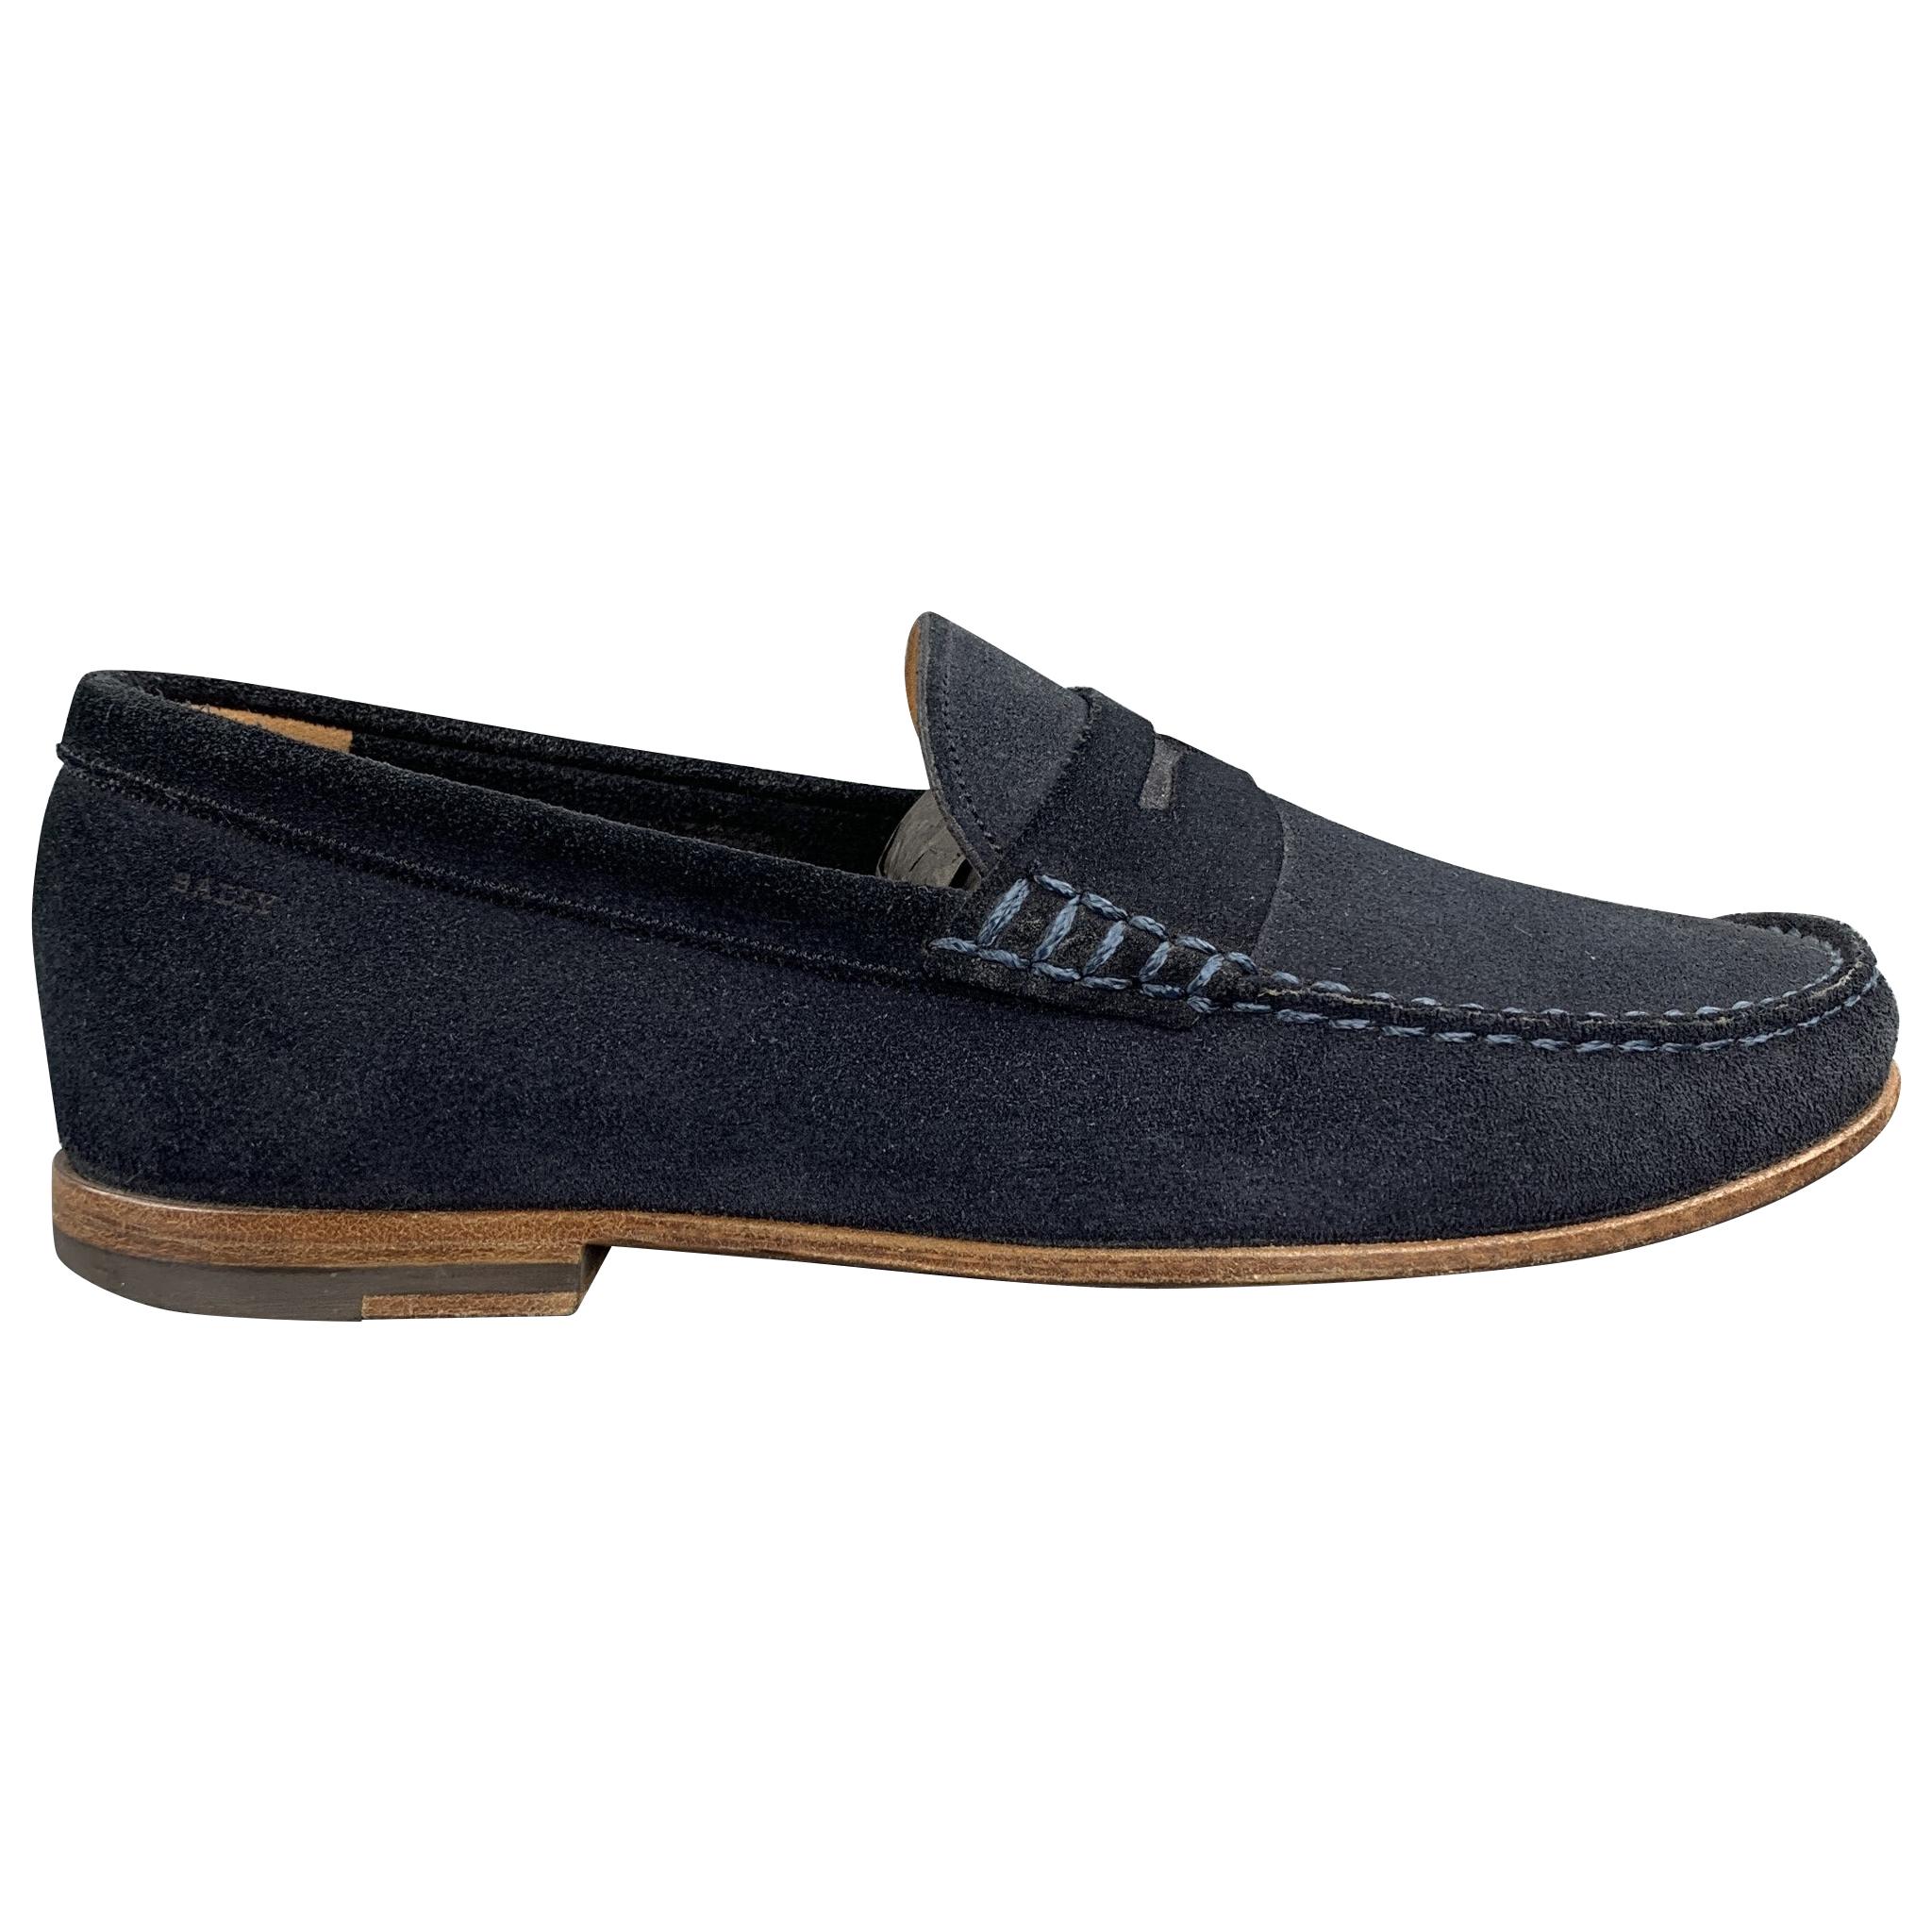 BALLY Size 7.5 Navy Suede Slip On Loafers